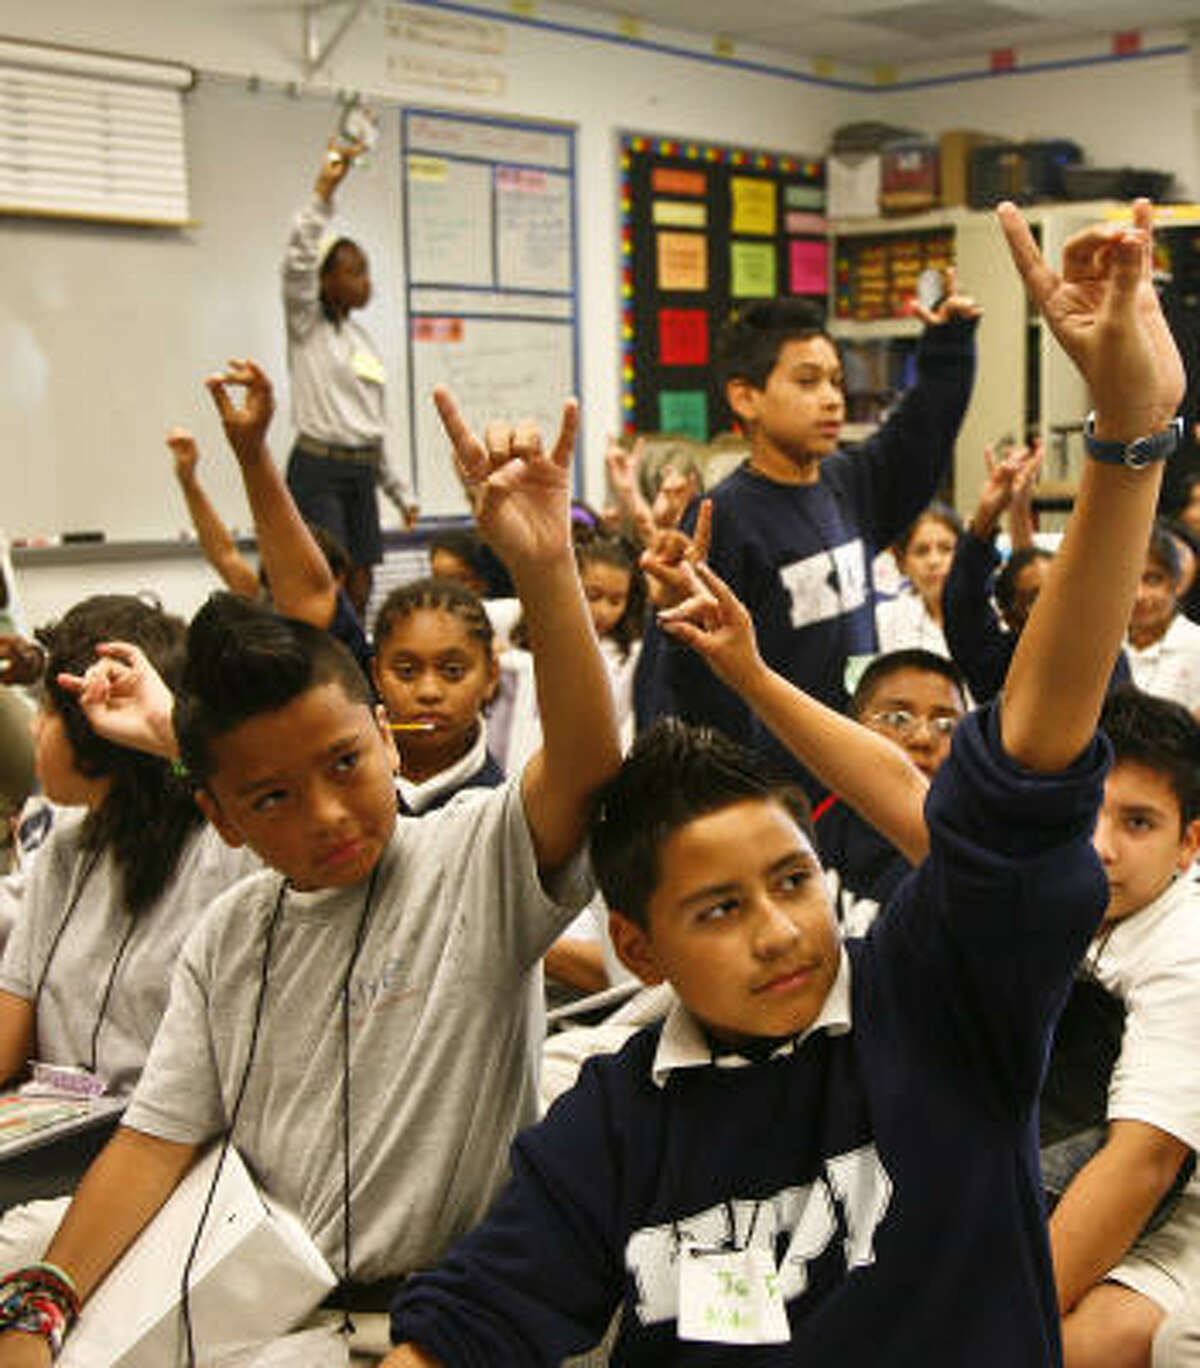 Sixth-graders raise their hands in response during a summer session class Monday at KIPP Academy. KIPP touted results of a study that dismisses questions about KIPP's methods.